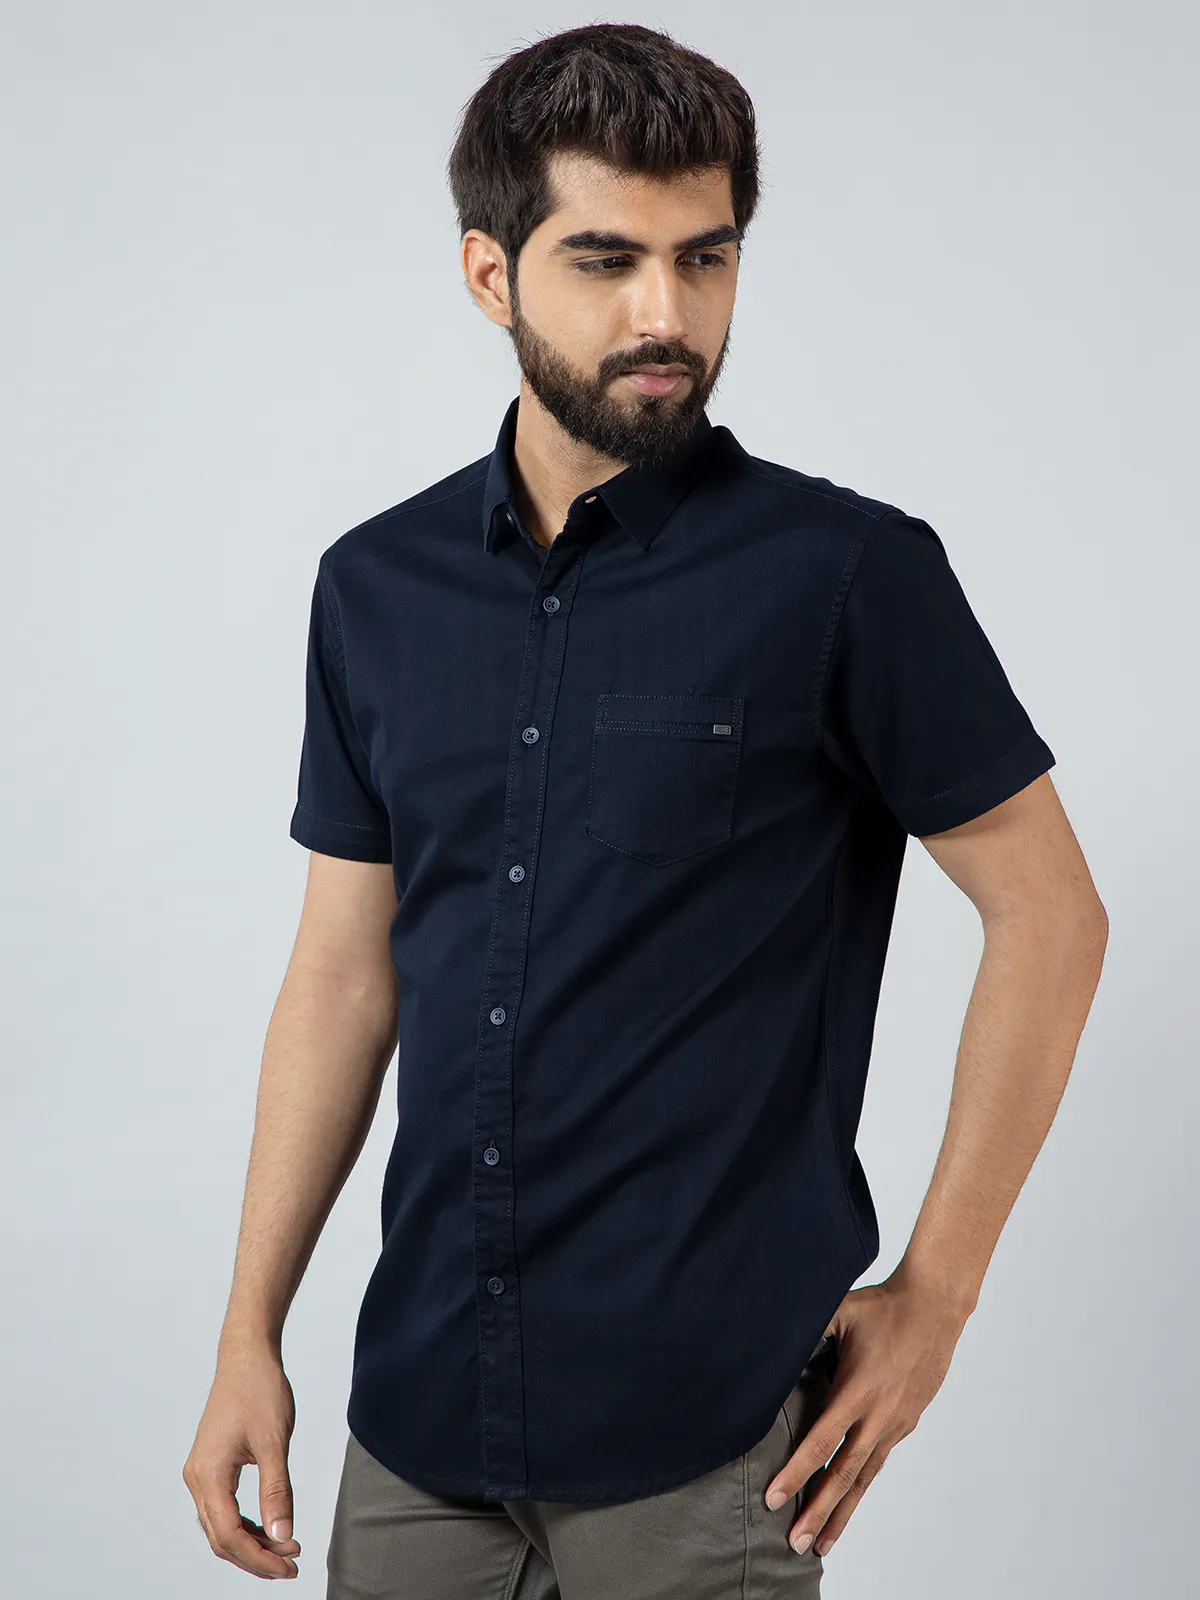 Pioneer solid navy cotton shirt for mens